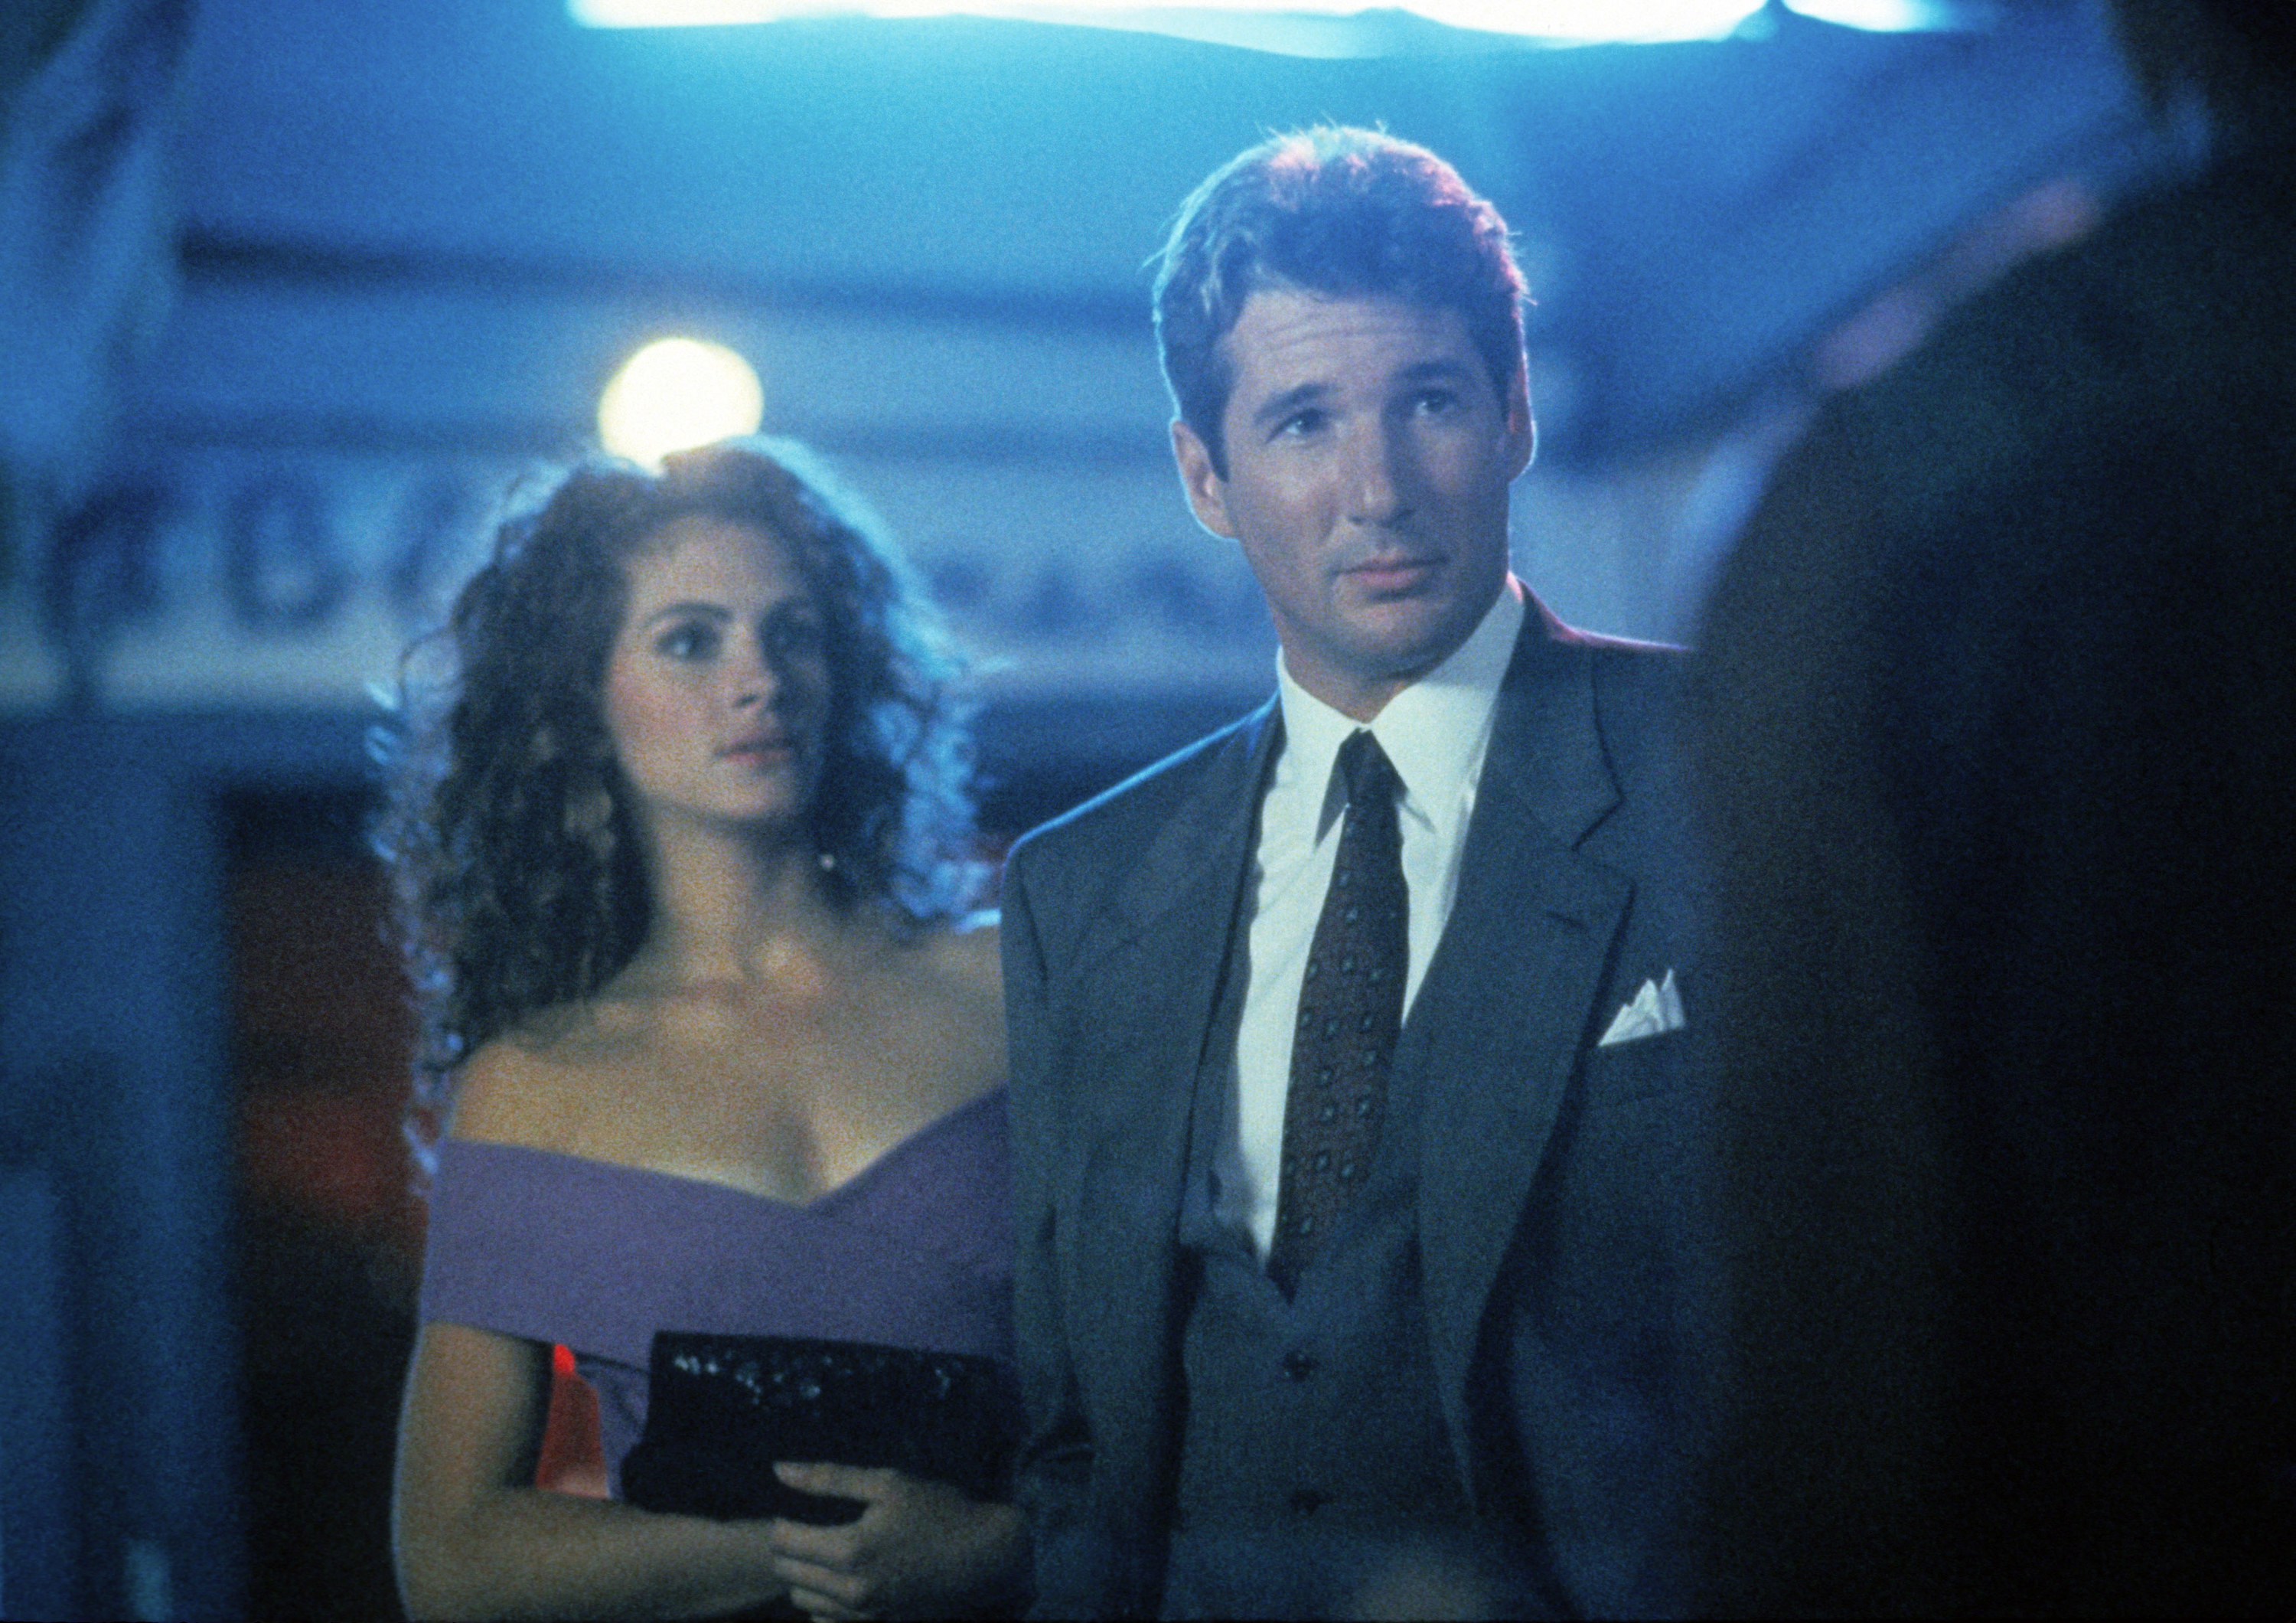 Julia Roberts and Richard Gere standing next to each other.